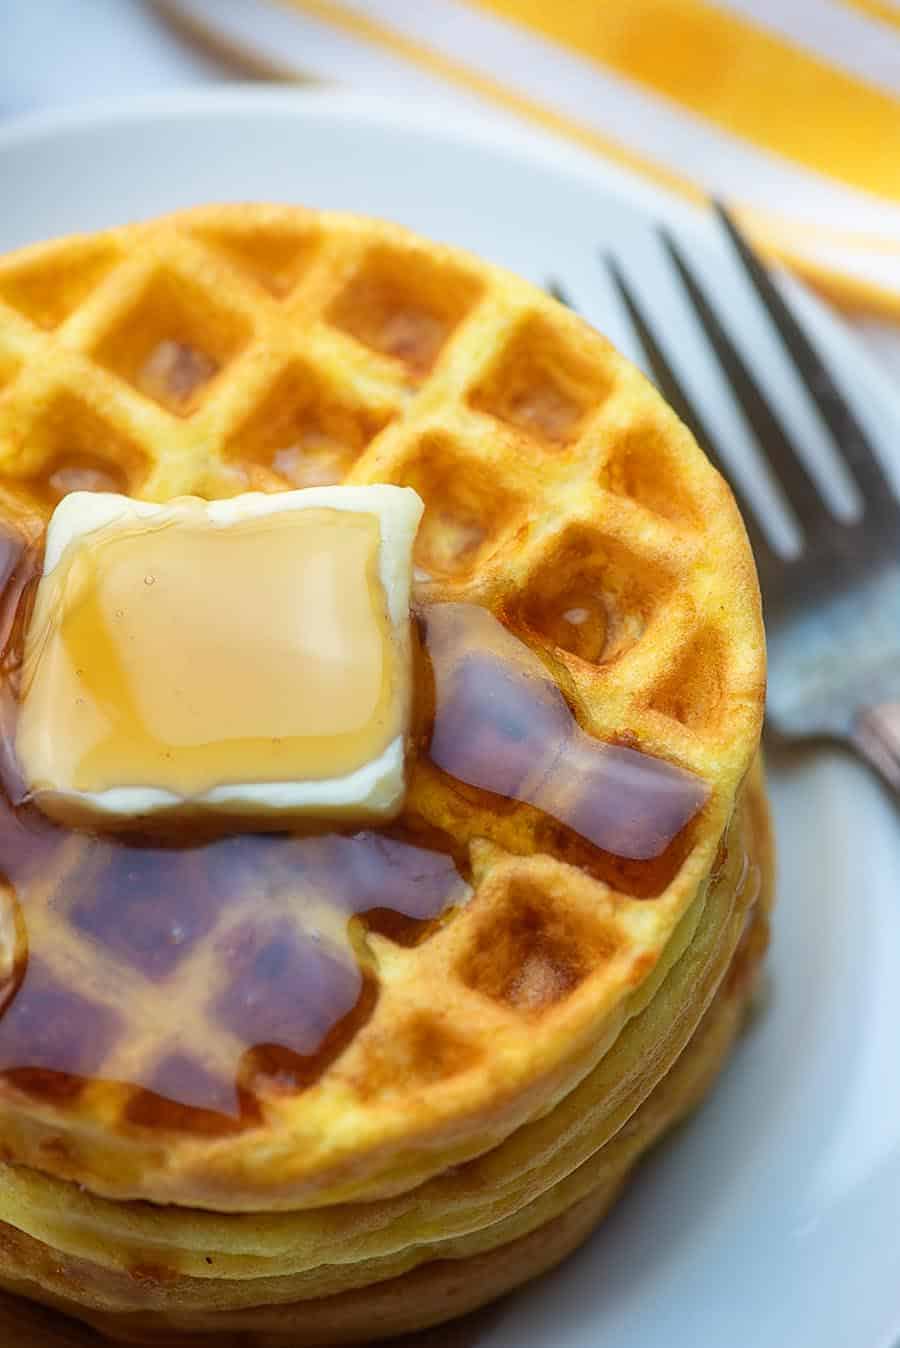 7 Things You Need to Know to Make the Best Chaffles!